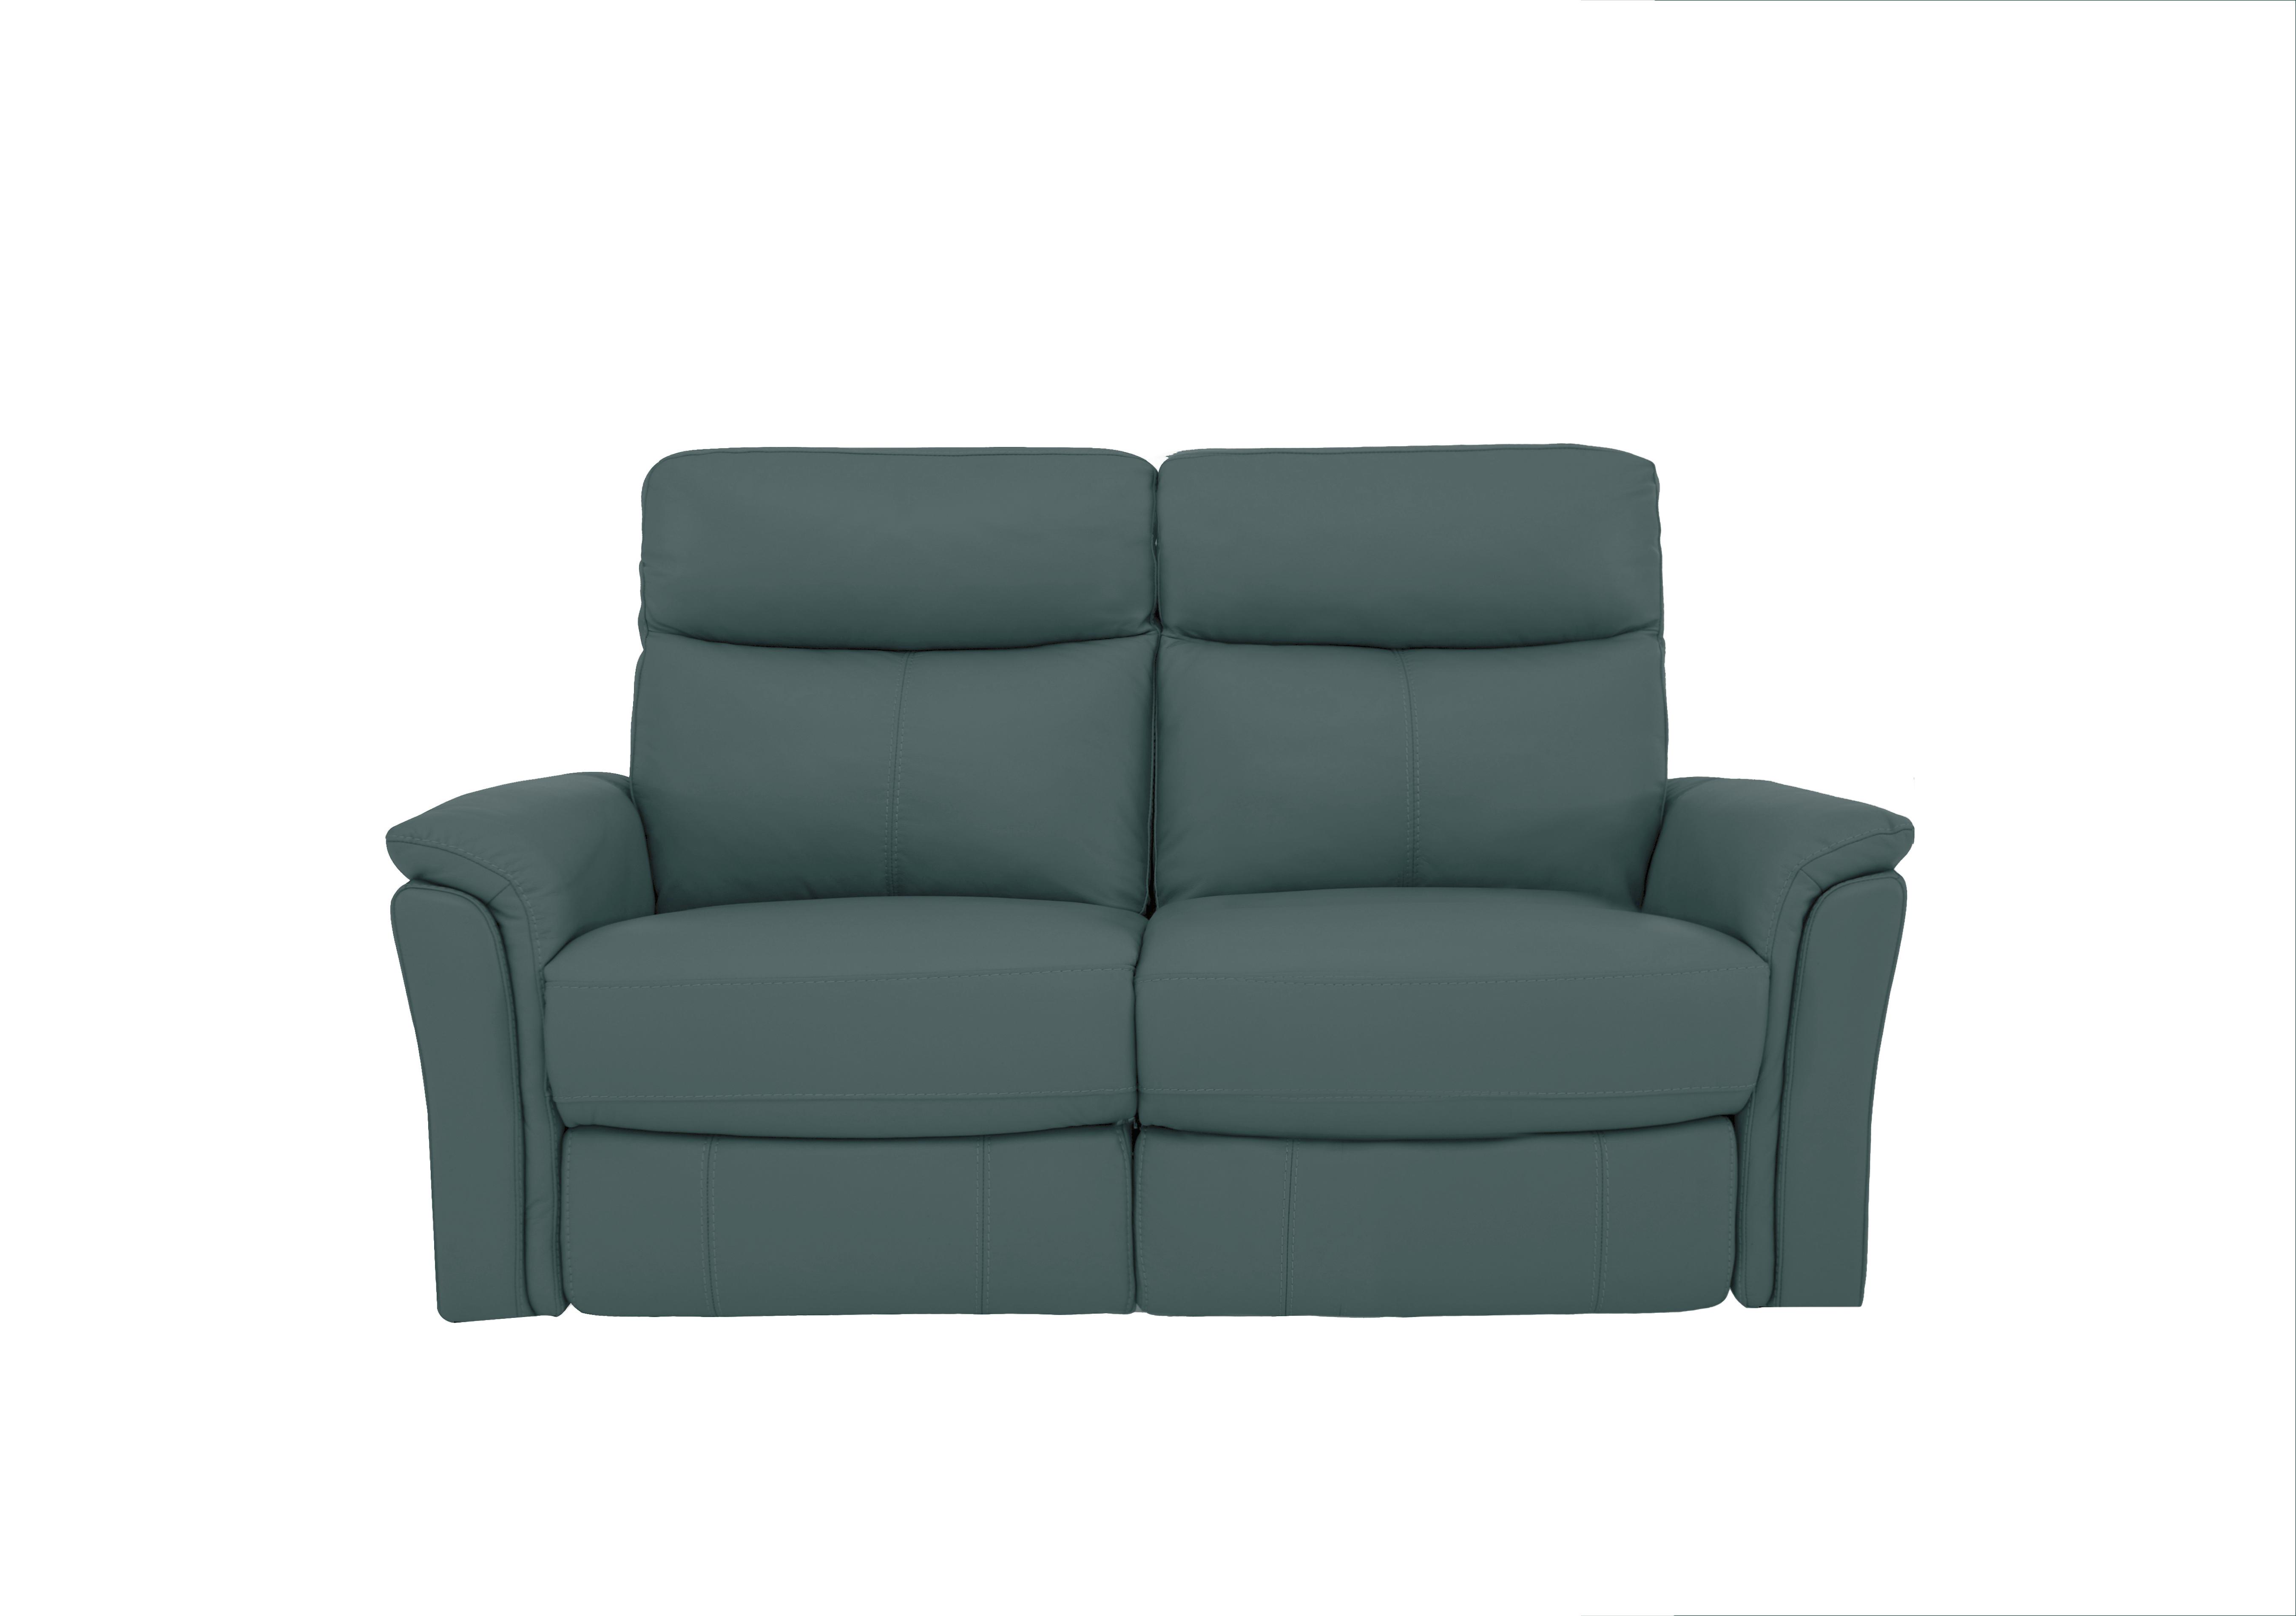 Compact Collection Piccolo 2 Seater Sofa in Bv-301e Lake Green on Furniture Village